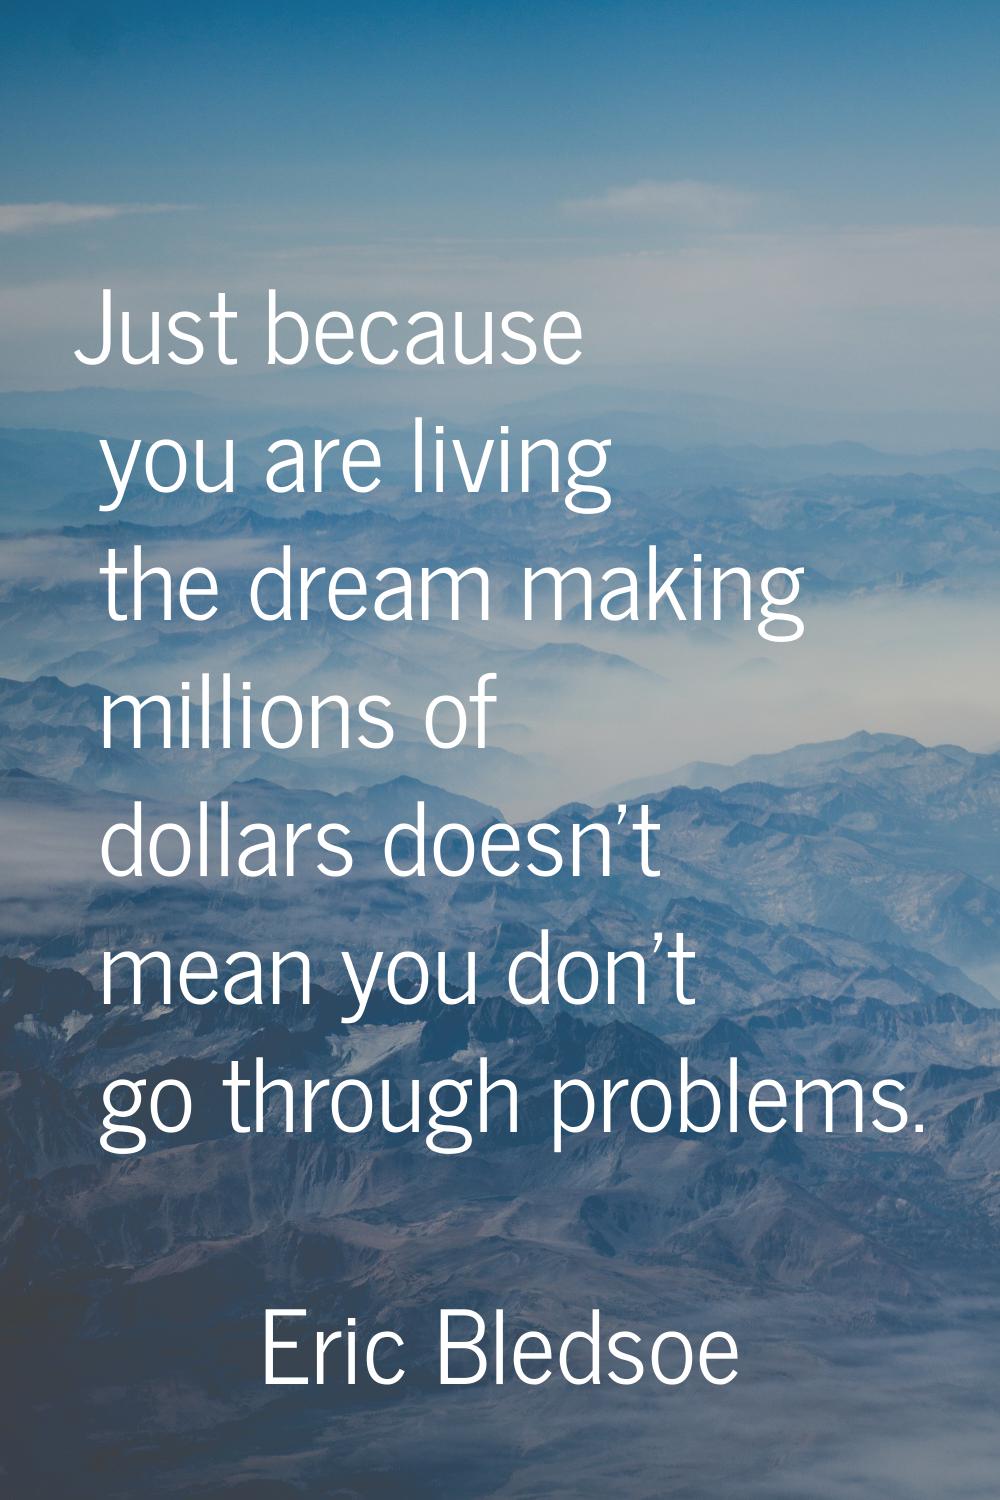 Just because you are living the dream making millions of dollars doesn't mean you don't go through 